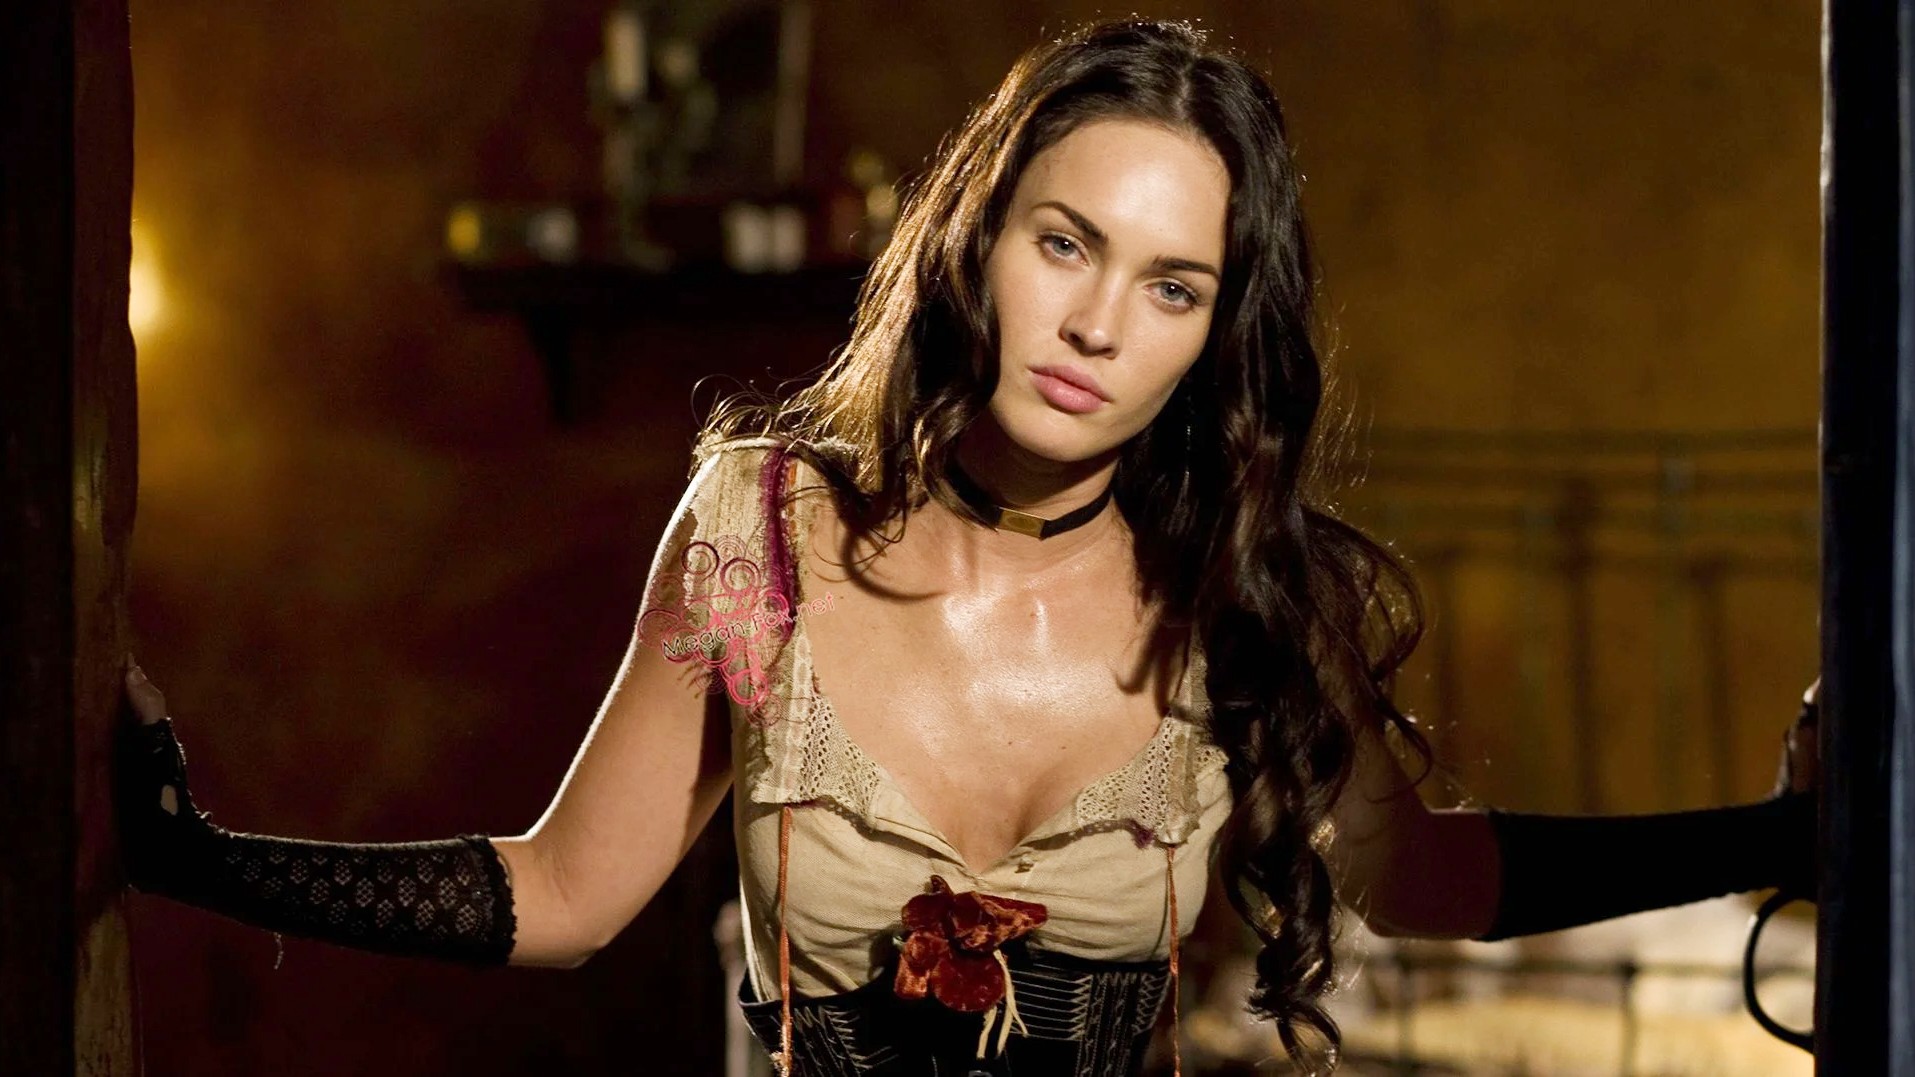 Hollywood Herion Megan Fox Sex Video - 5 Sexy Megan Fox Movie Roles You Need To See